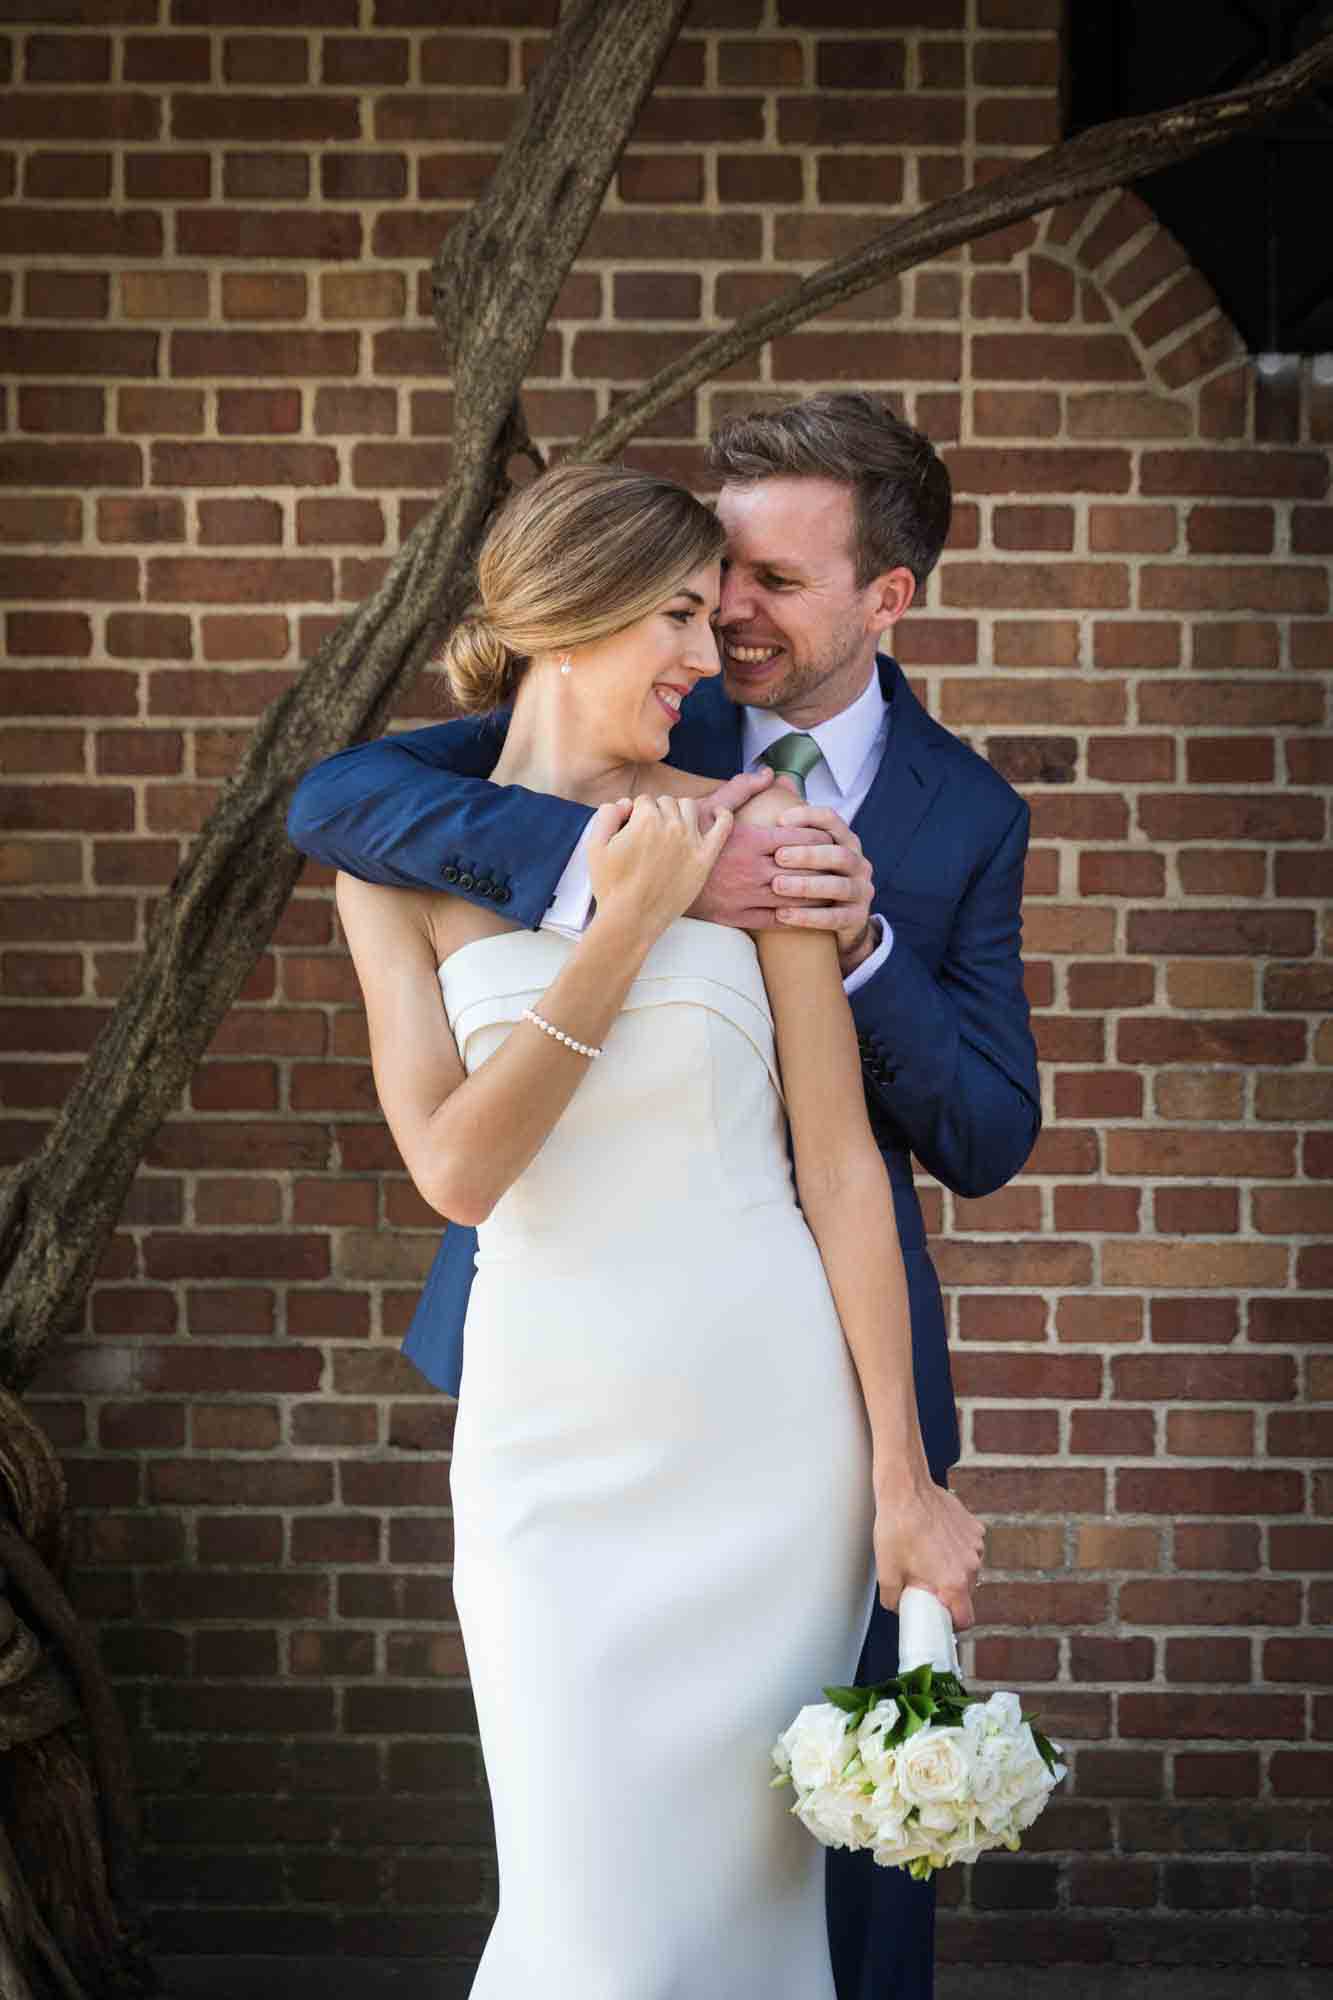 Couple hugging in front of brick wall during a Conservatory Garden wedding in Central Park